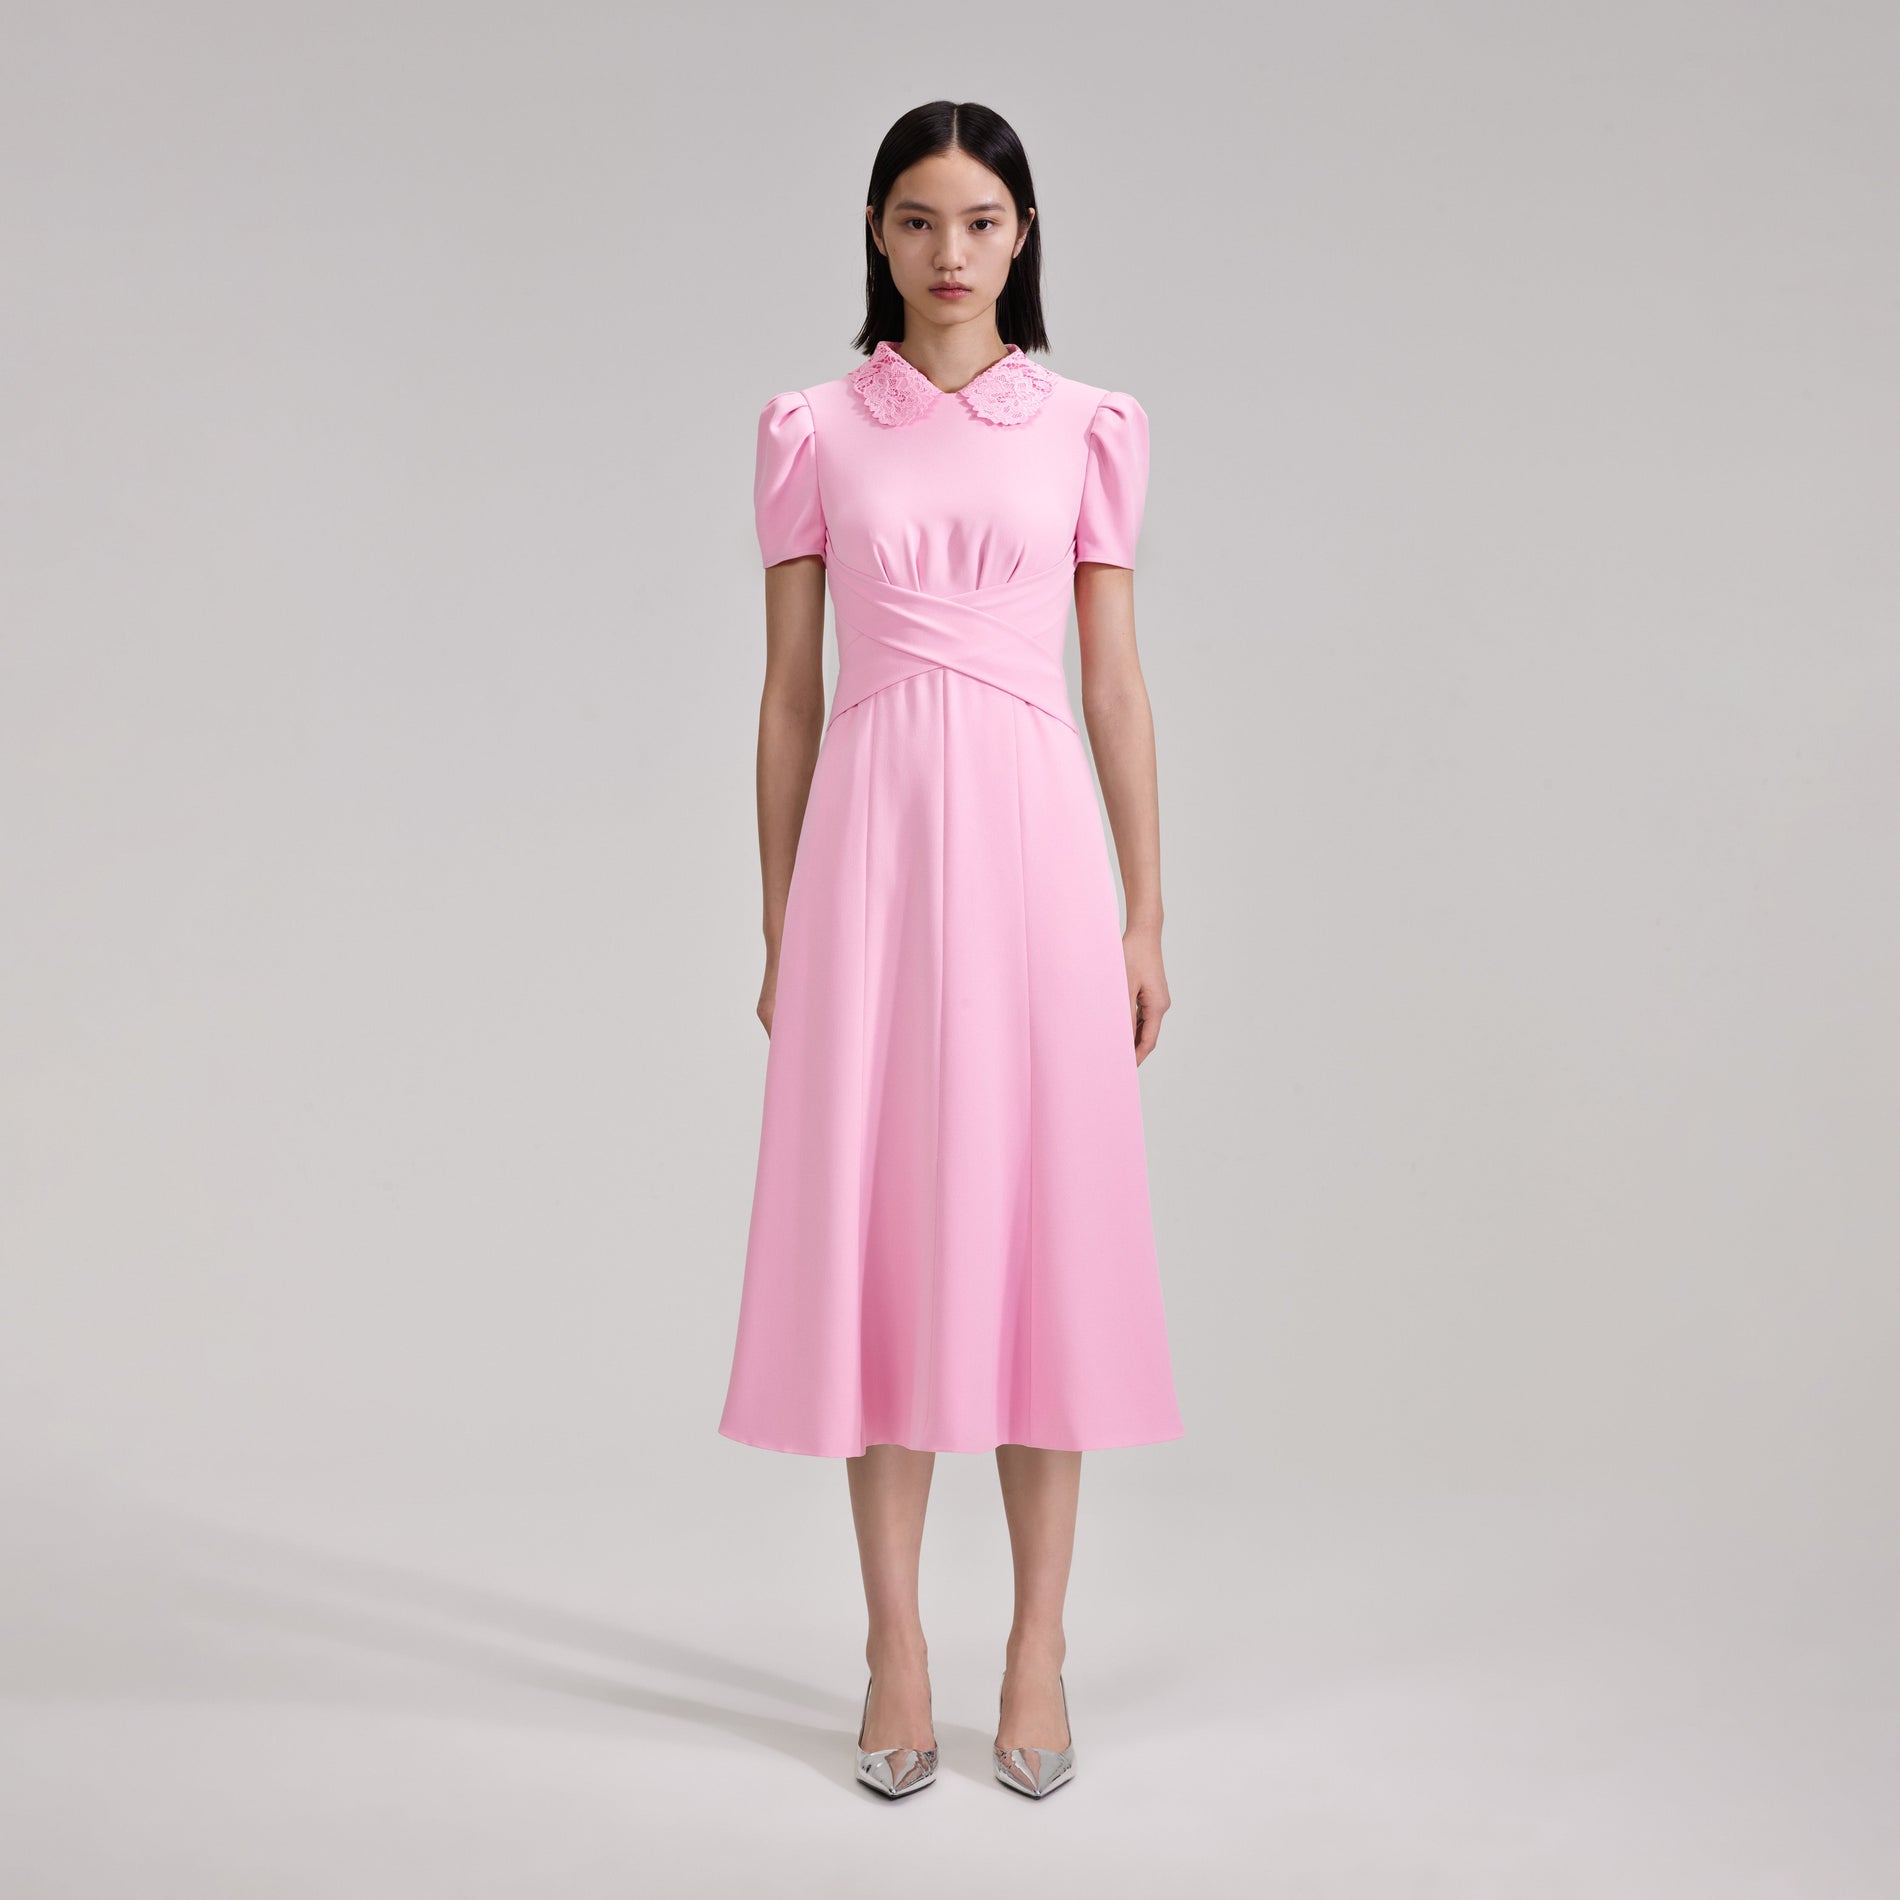 A woman wearing the Pink Heavy Crepe Midi Dress